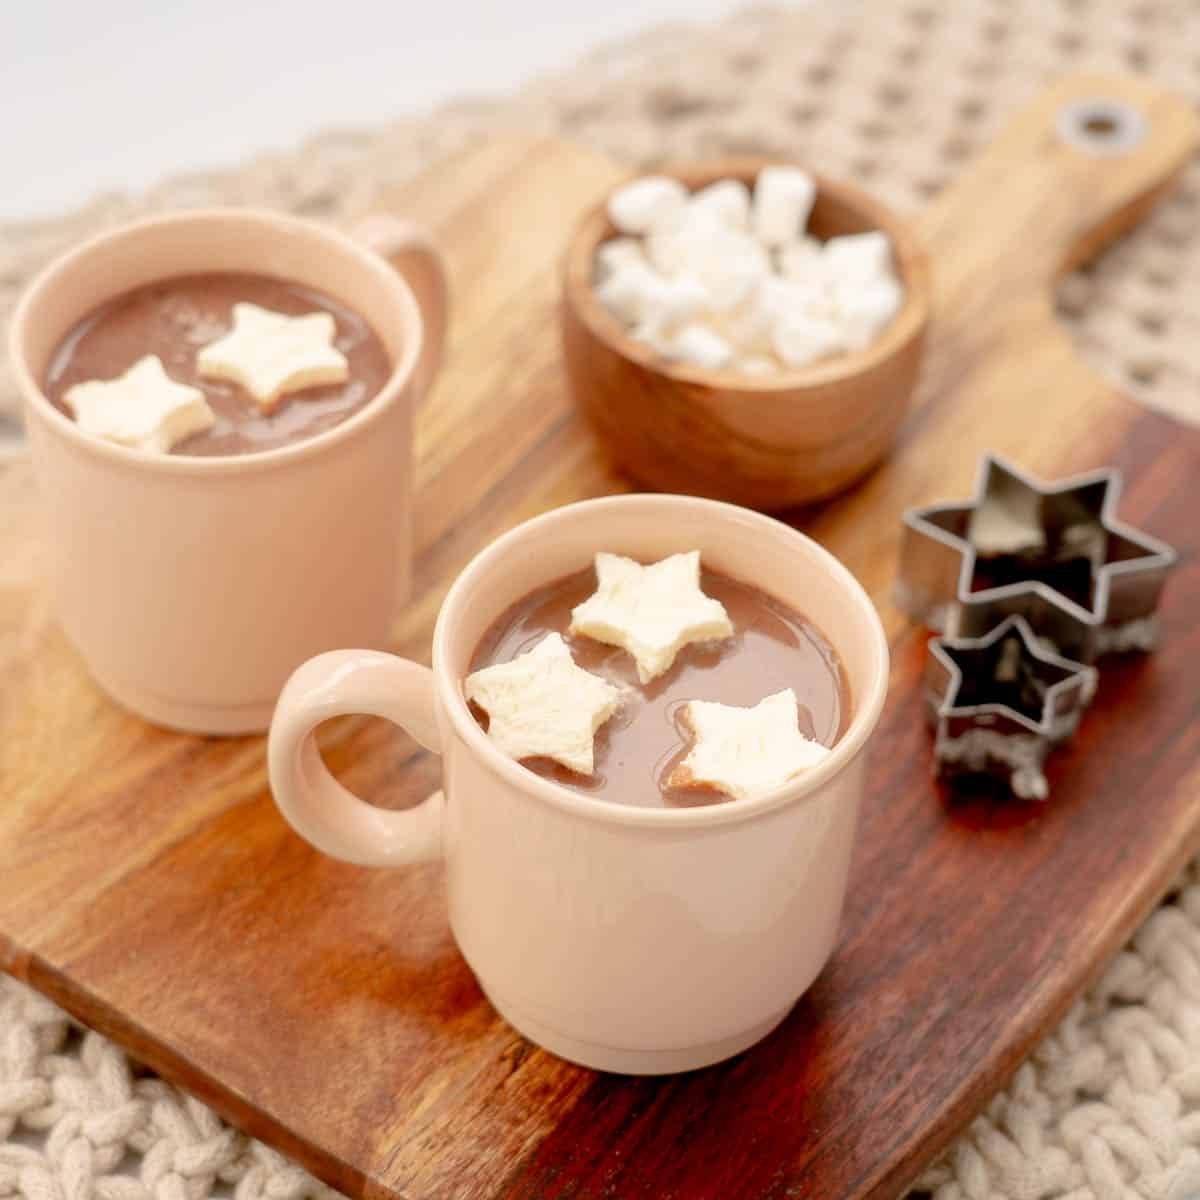 Two mugs of hot chocolate with floating star-shaped  hot chocolate toppers